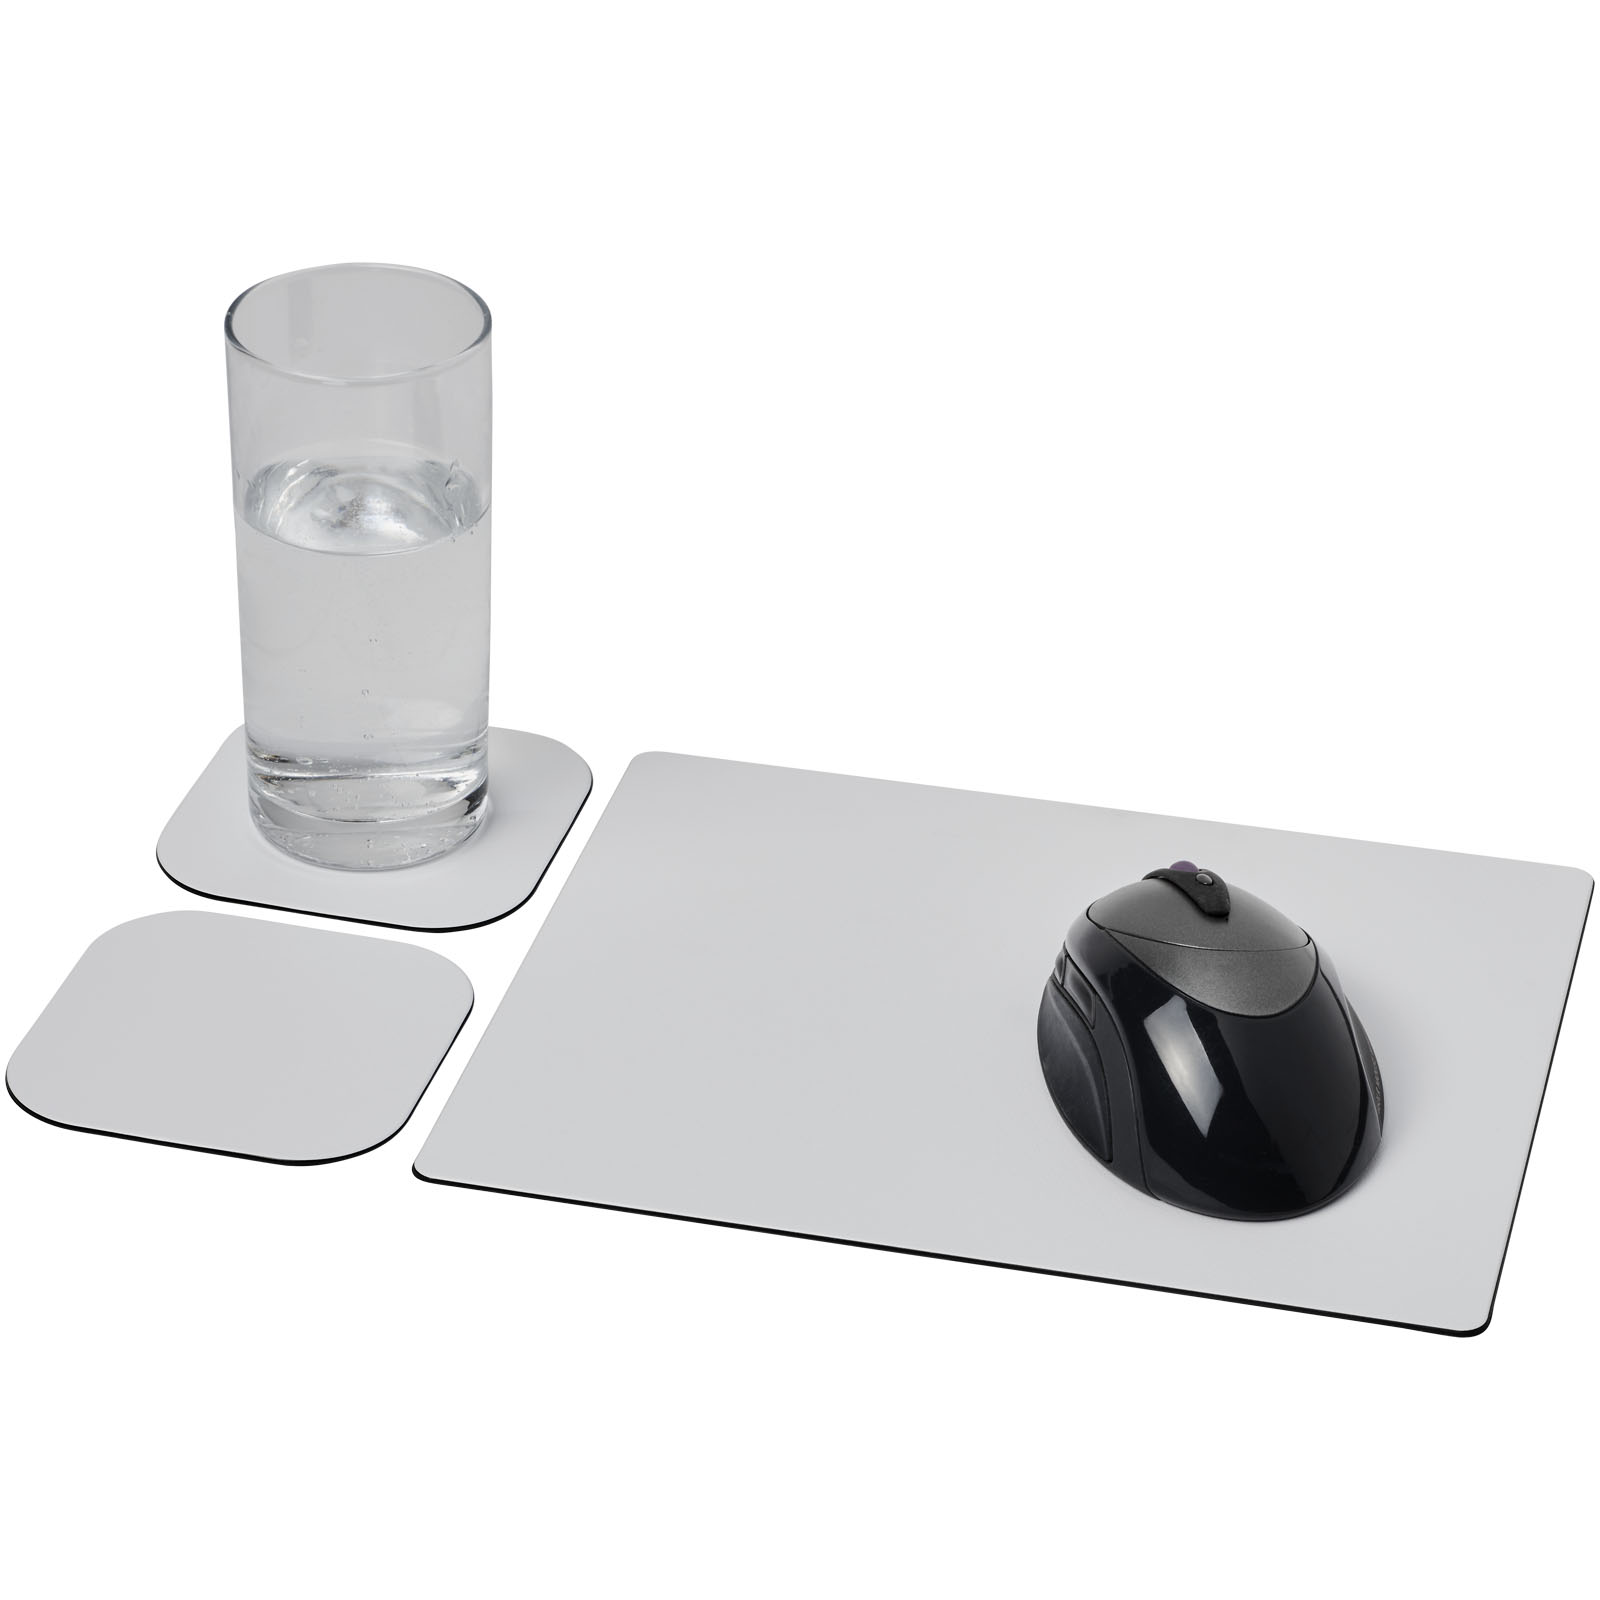 Advertising Computer Accessories - Brite-Mat® mouse mat and coaster set combo 3